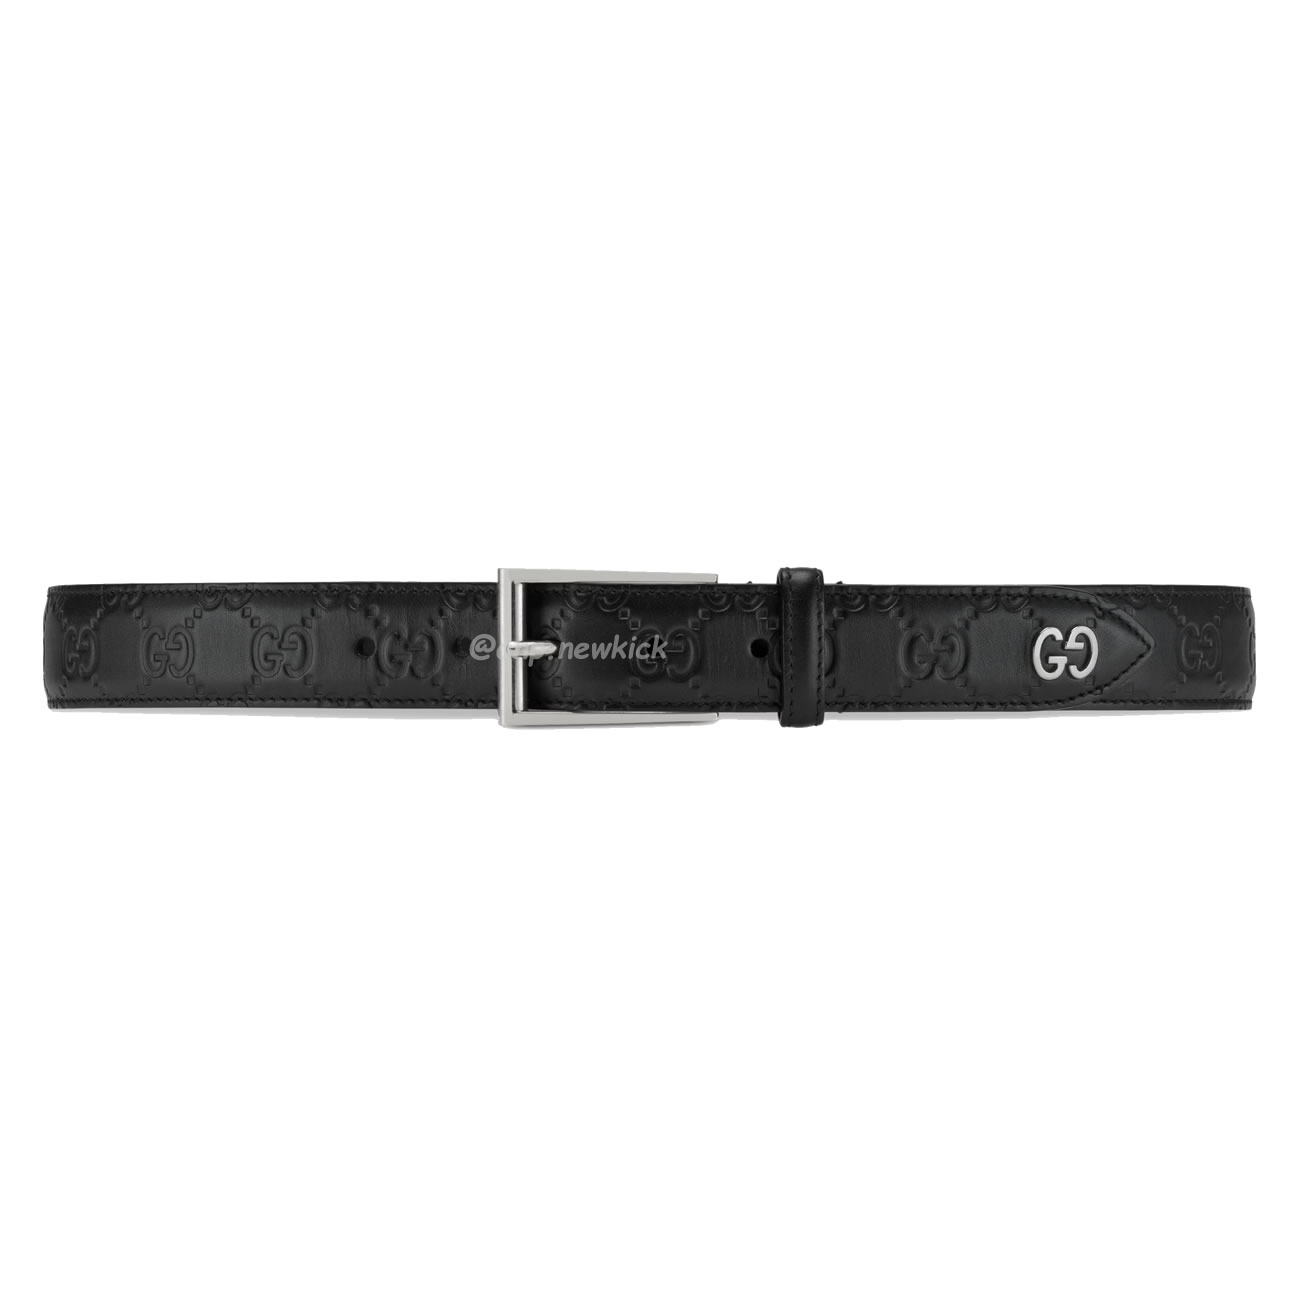 Gucci Signature Belt With Gg Detail Black 474311 Cwc1n 1000 (1) - newkick.org